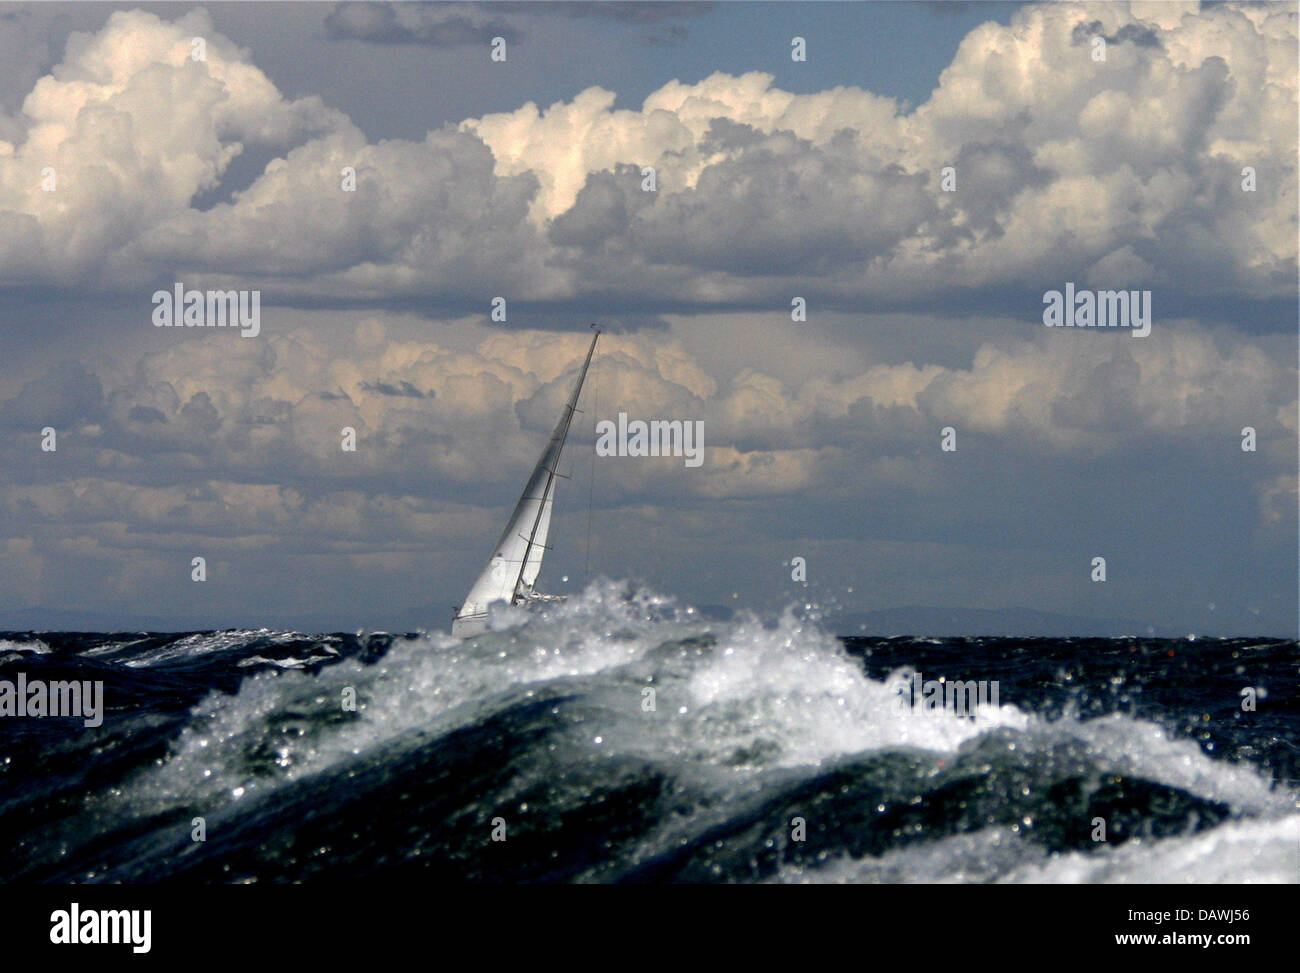 A sailing boat shown in the choppy Mediterranean off the coast of Valencia, Spain, 1 May 2007. Round Robin Two's Flight 3 race of Louiss Vuitton Cup had to be postponed due to too strong winds. The winner of challengers' cup Louis Vuitton Cup will face the titleholder at the 32nd 'America's Cup' taking place in June 2007. Photo: Maurizio Gambarini Stock Photo